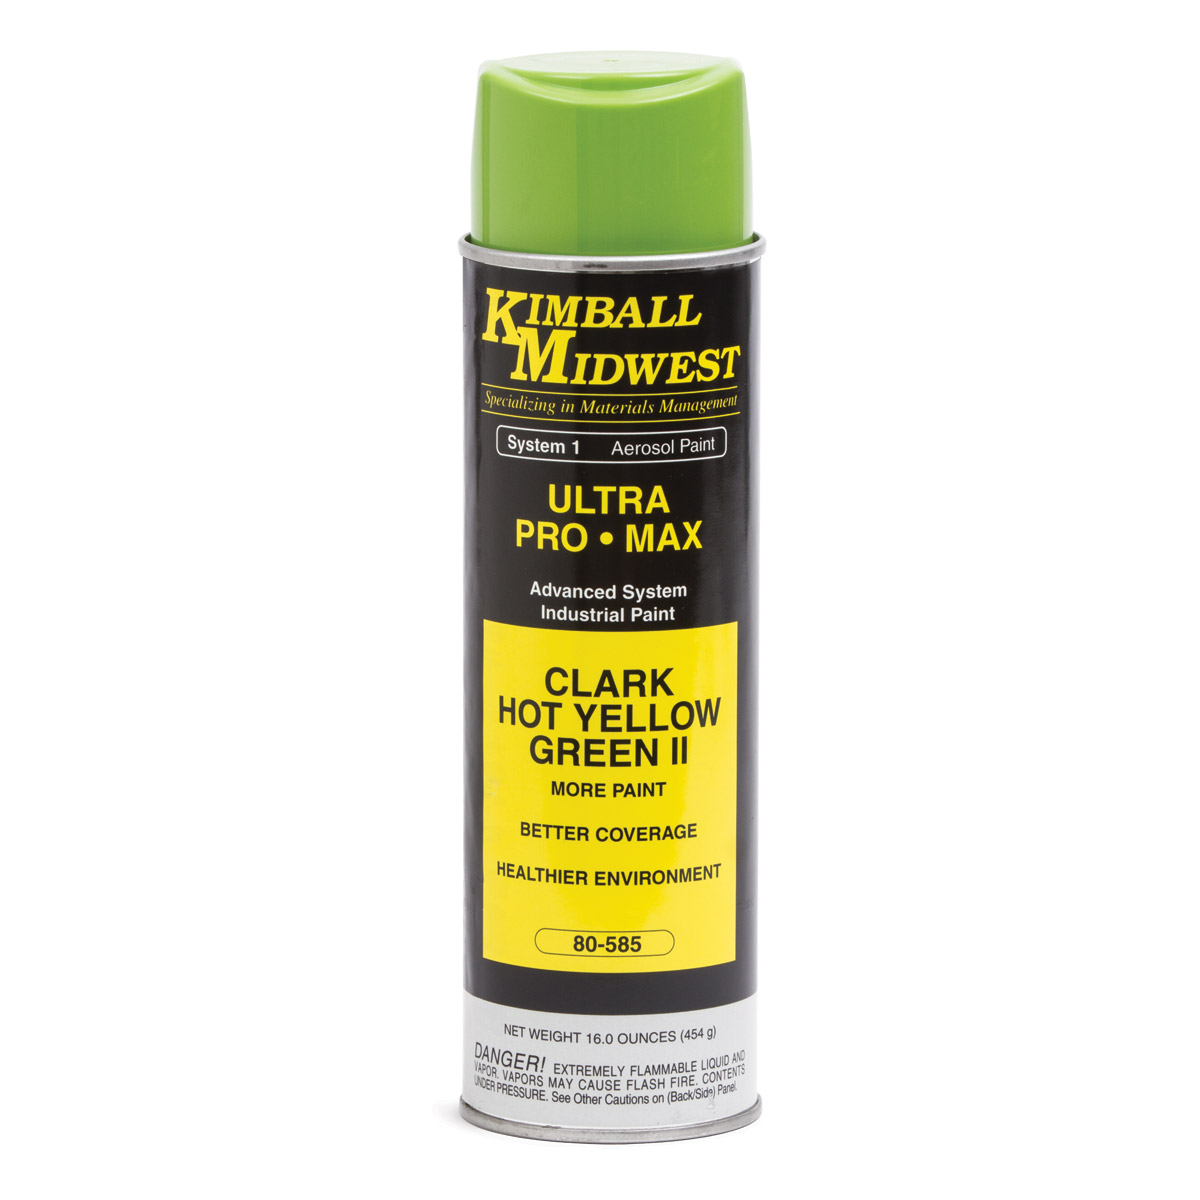 Ck Hot Yellow Green Ii Ultra Pro Max Paint Kimball Midwest